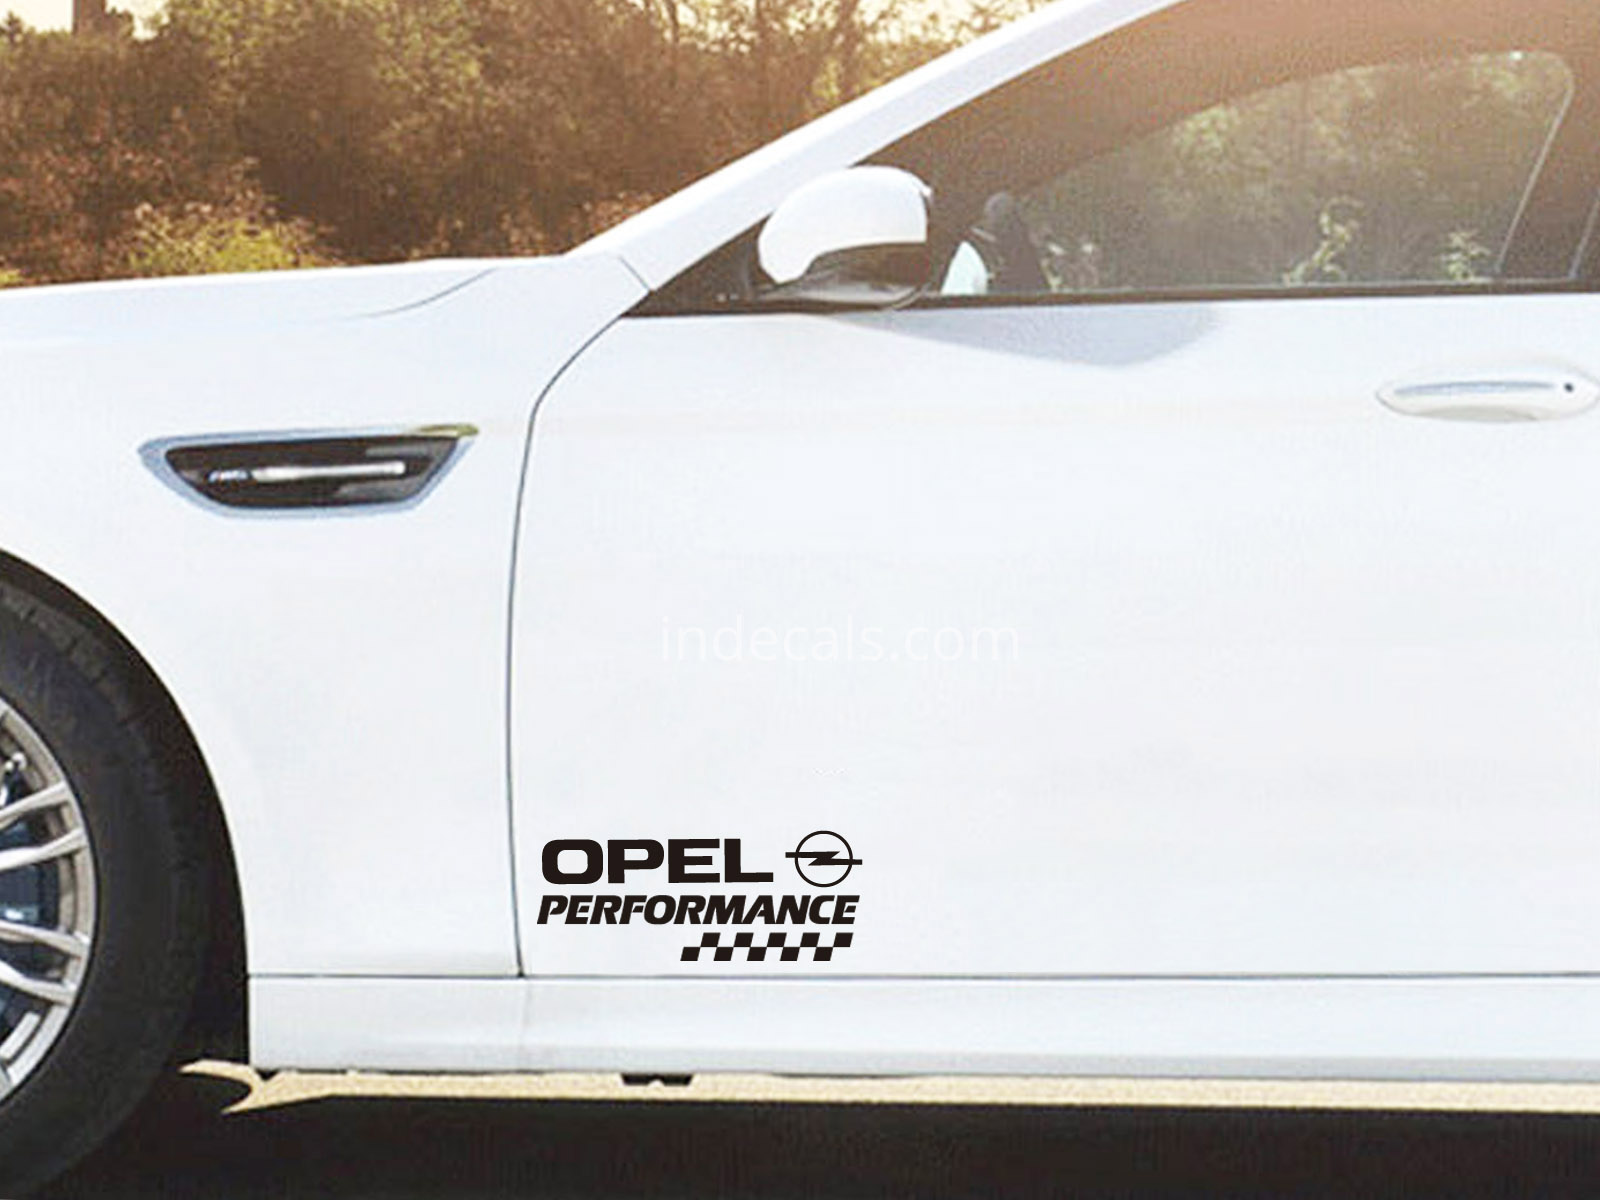 2 x Opel Performance Stickers for Doors - Black